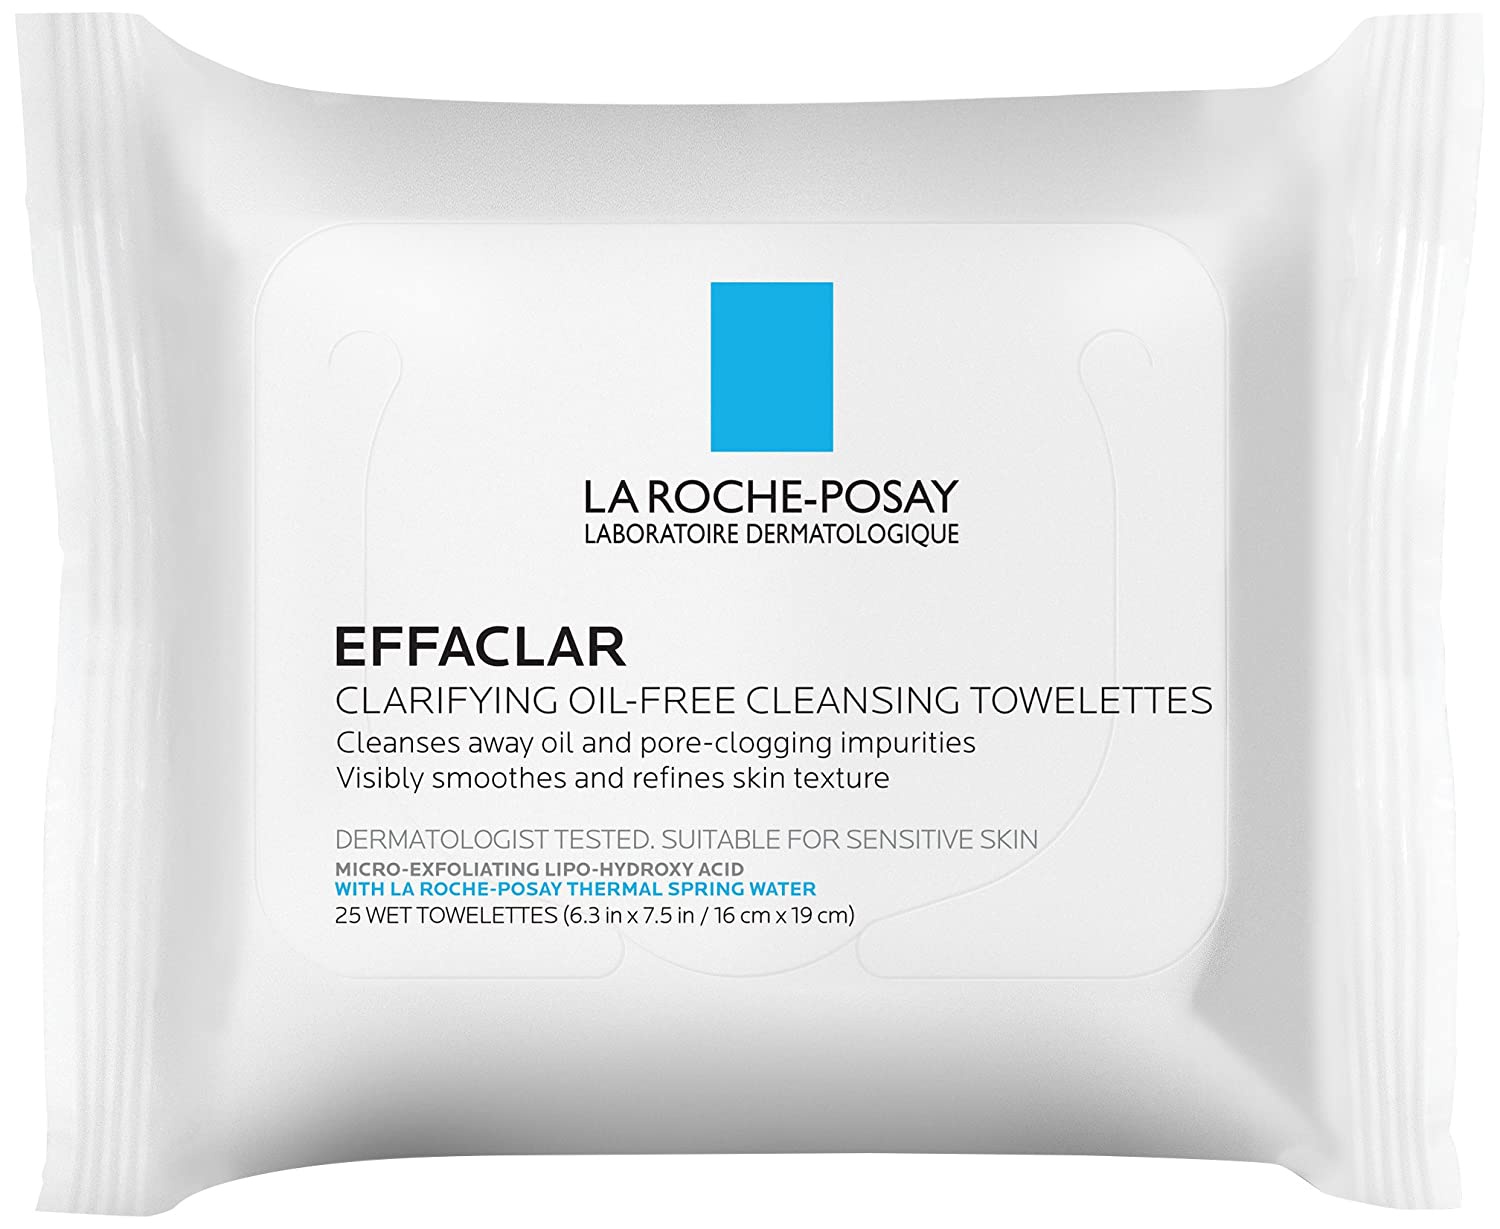 La Roche-Posay Effaclar Oil-Free Cleansing Face Wipes Towelettes